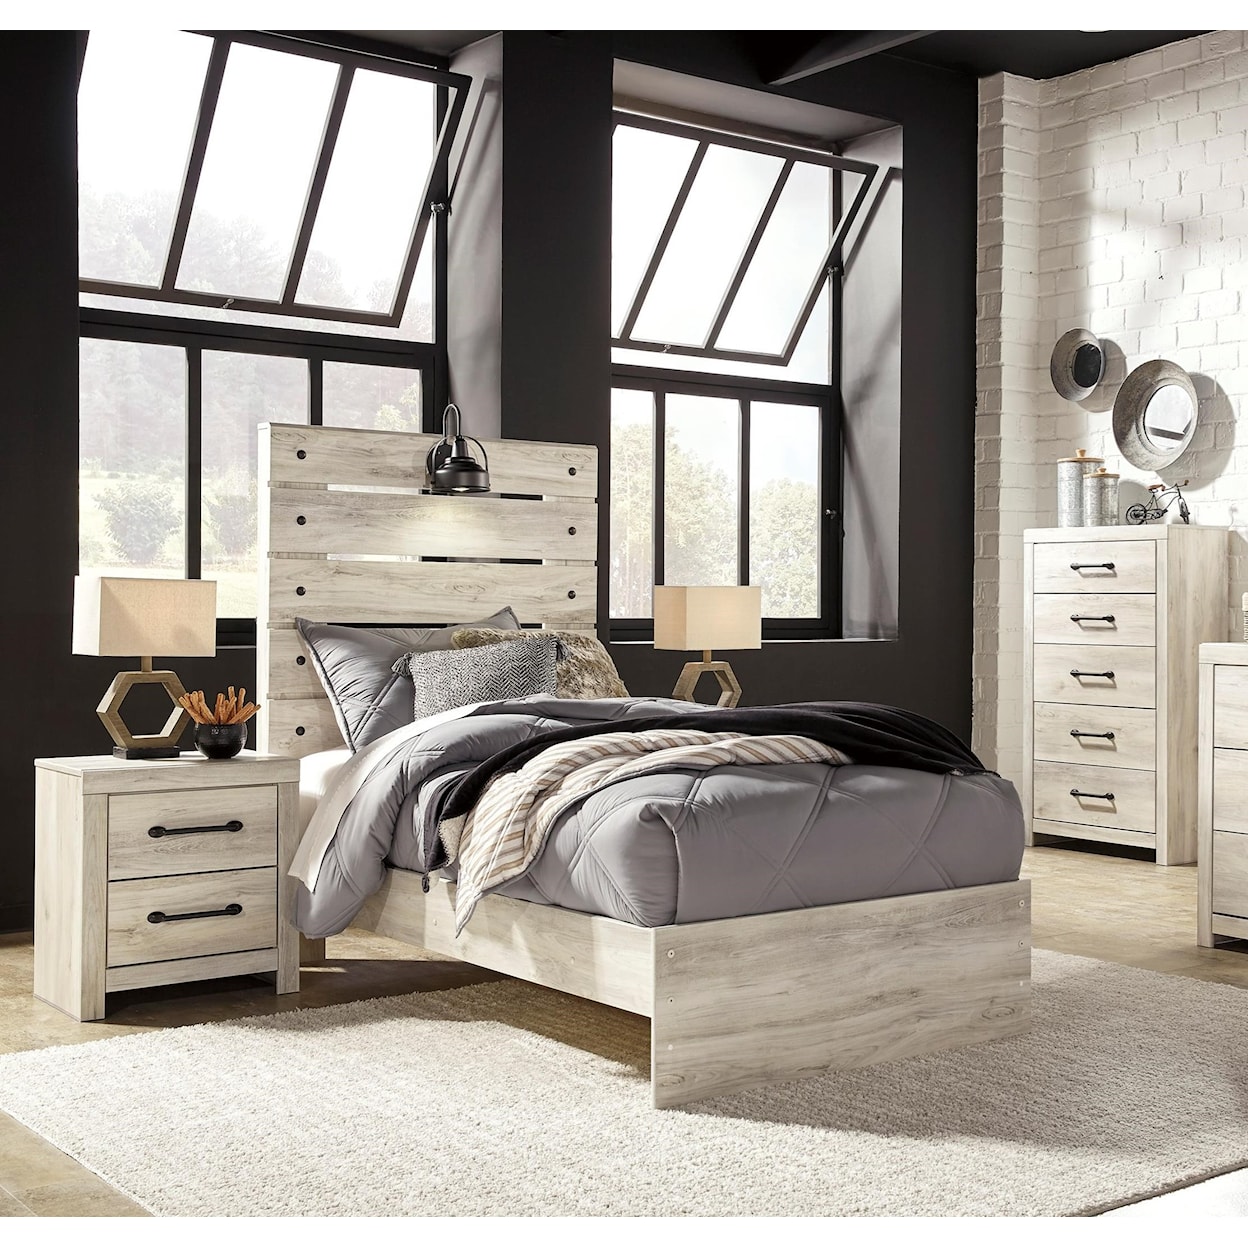 Signature Design by Ashley Baleigh Twin Bedroom Group